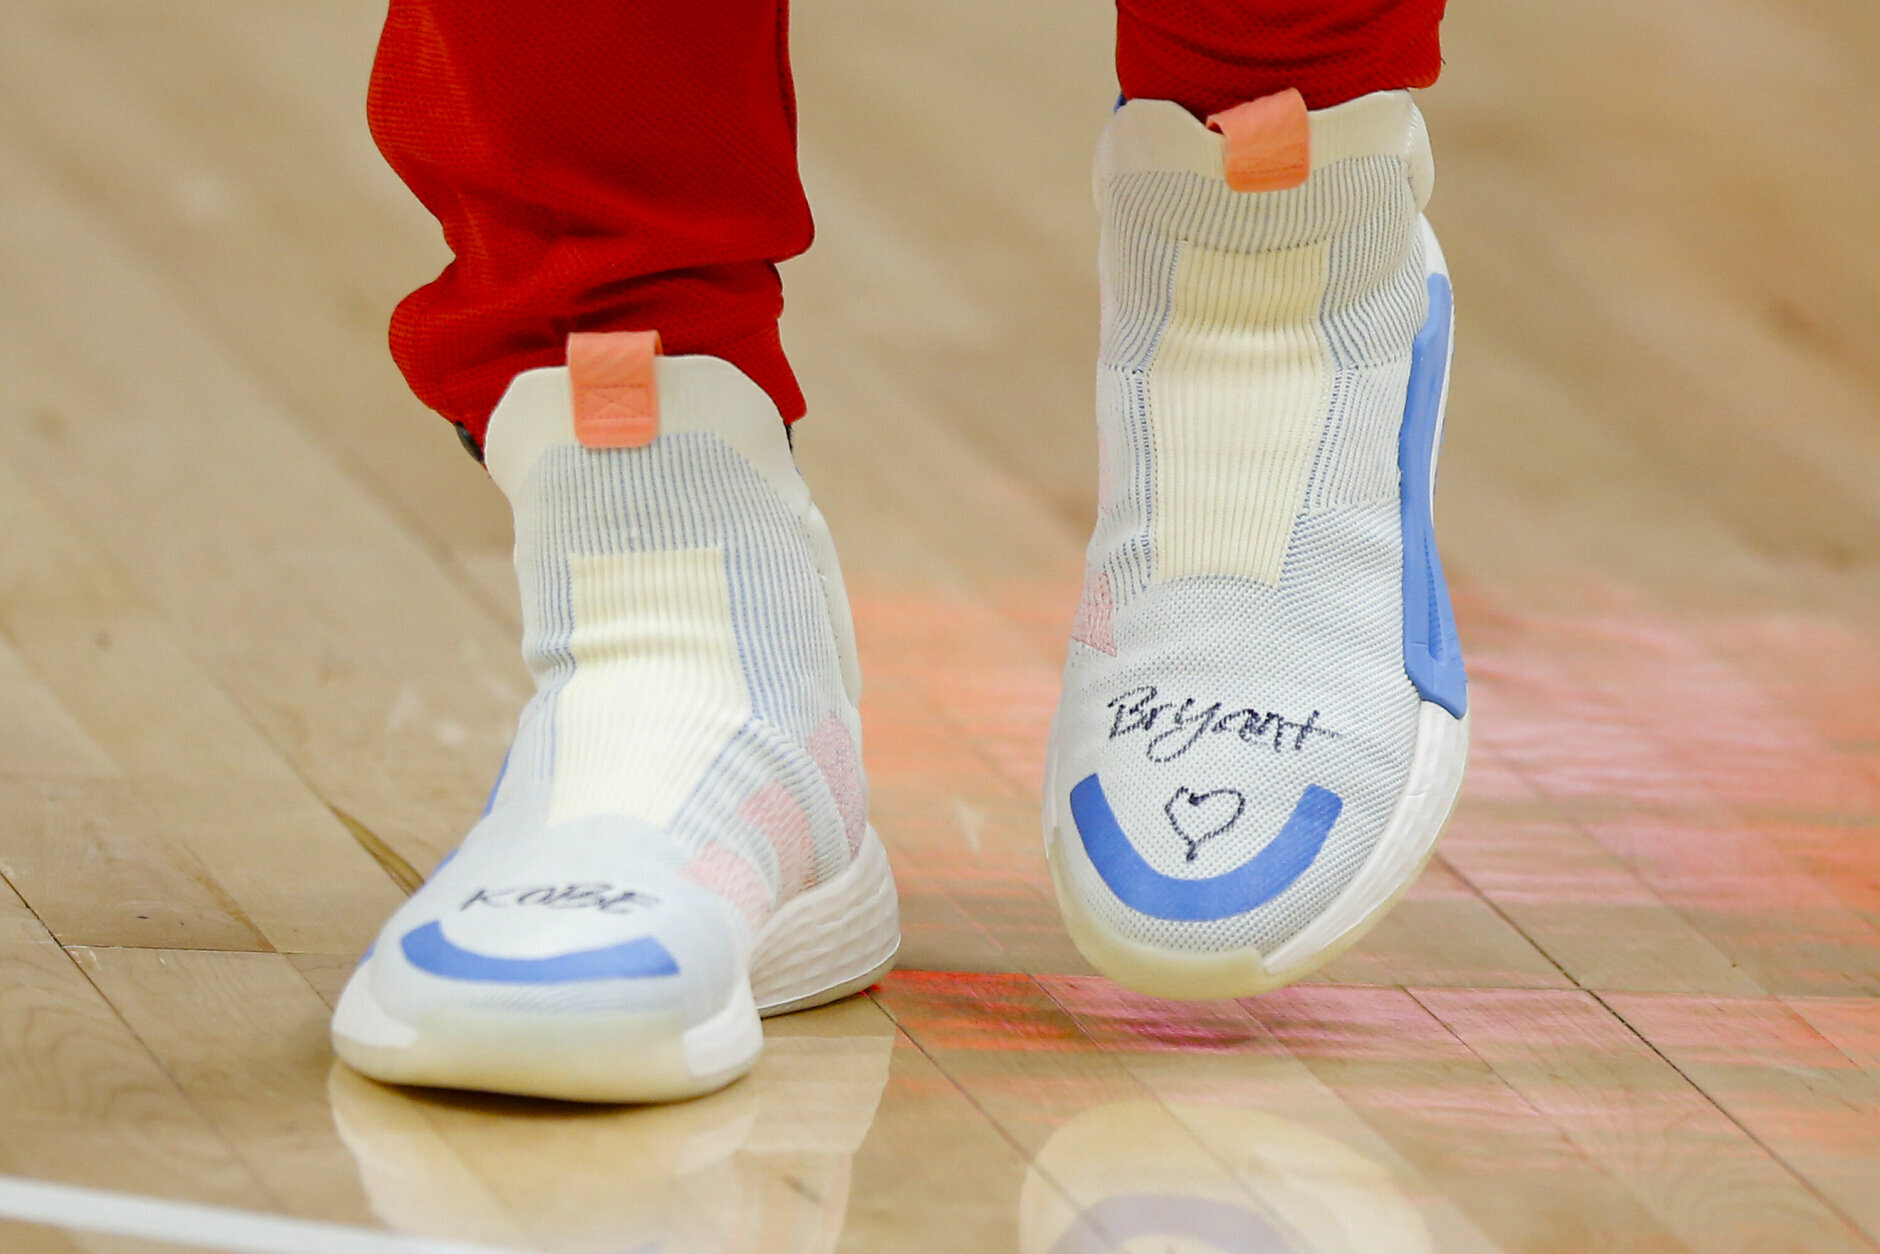 Atlanta Hawks guard Trae Young's (11) shoes honors Kobe Bryant prior to an NBA basketball game against the Washington Wizards on Sunday, Jan. 26, 2020, in Atlanta. Bryant  died in a helicopter crash Sunday. (AP Photo/Todd Kirkland)